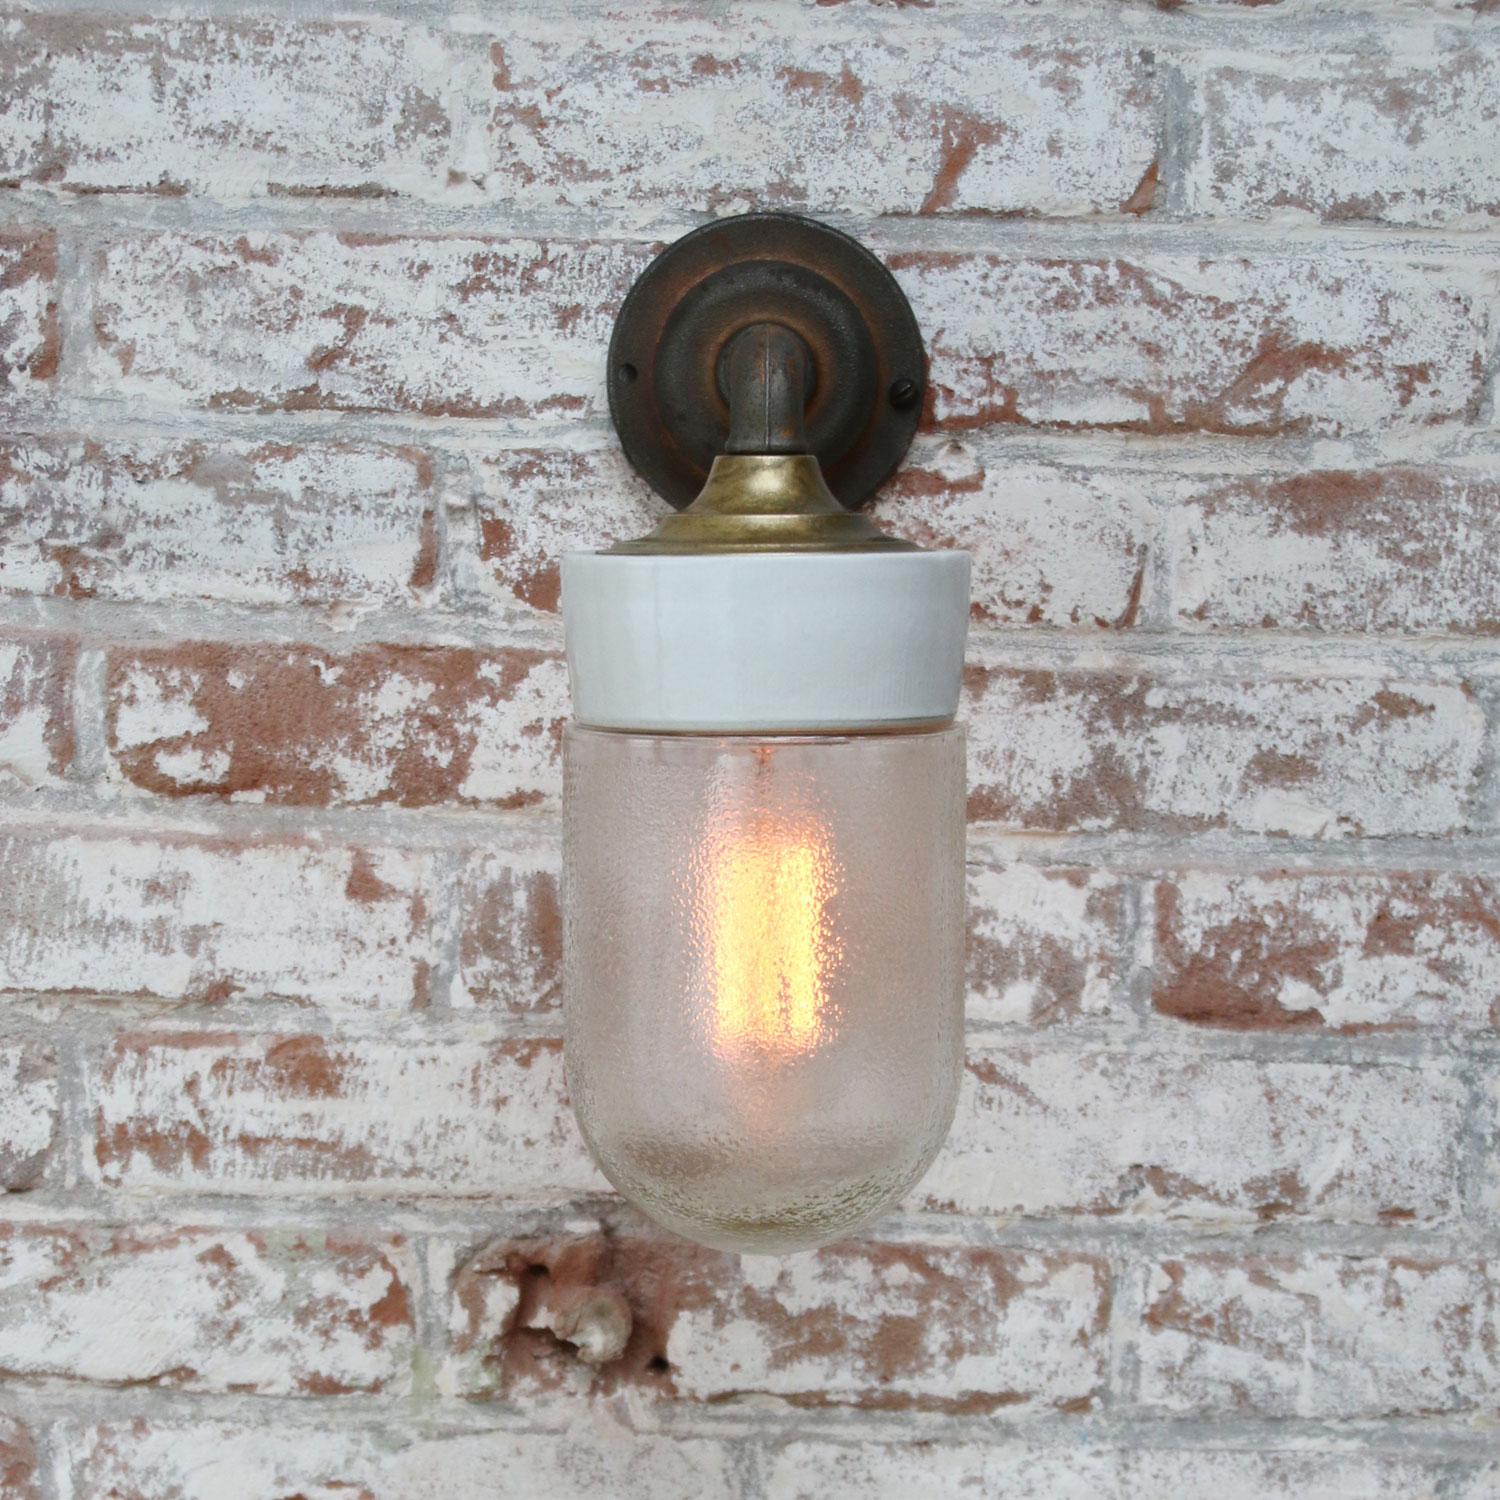 Porcelain Industrial wall lamp.
White porcelain, brass and cast iron
Frosted glass.
2 conductors, no ground.

Diameter cast iron wall piece 10 cm. 2 holes to secure.

Weight: 2.25 kg / 5 lb

Priced per individual item. All lamps have been